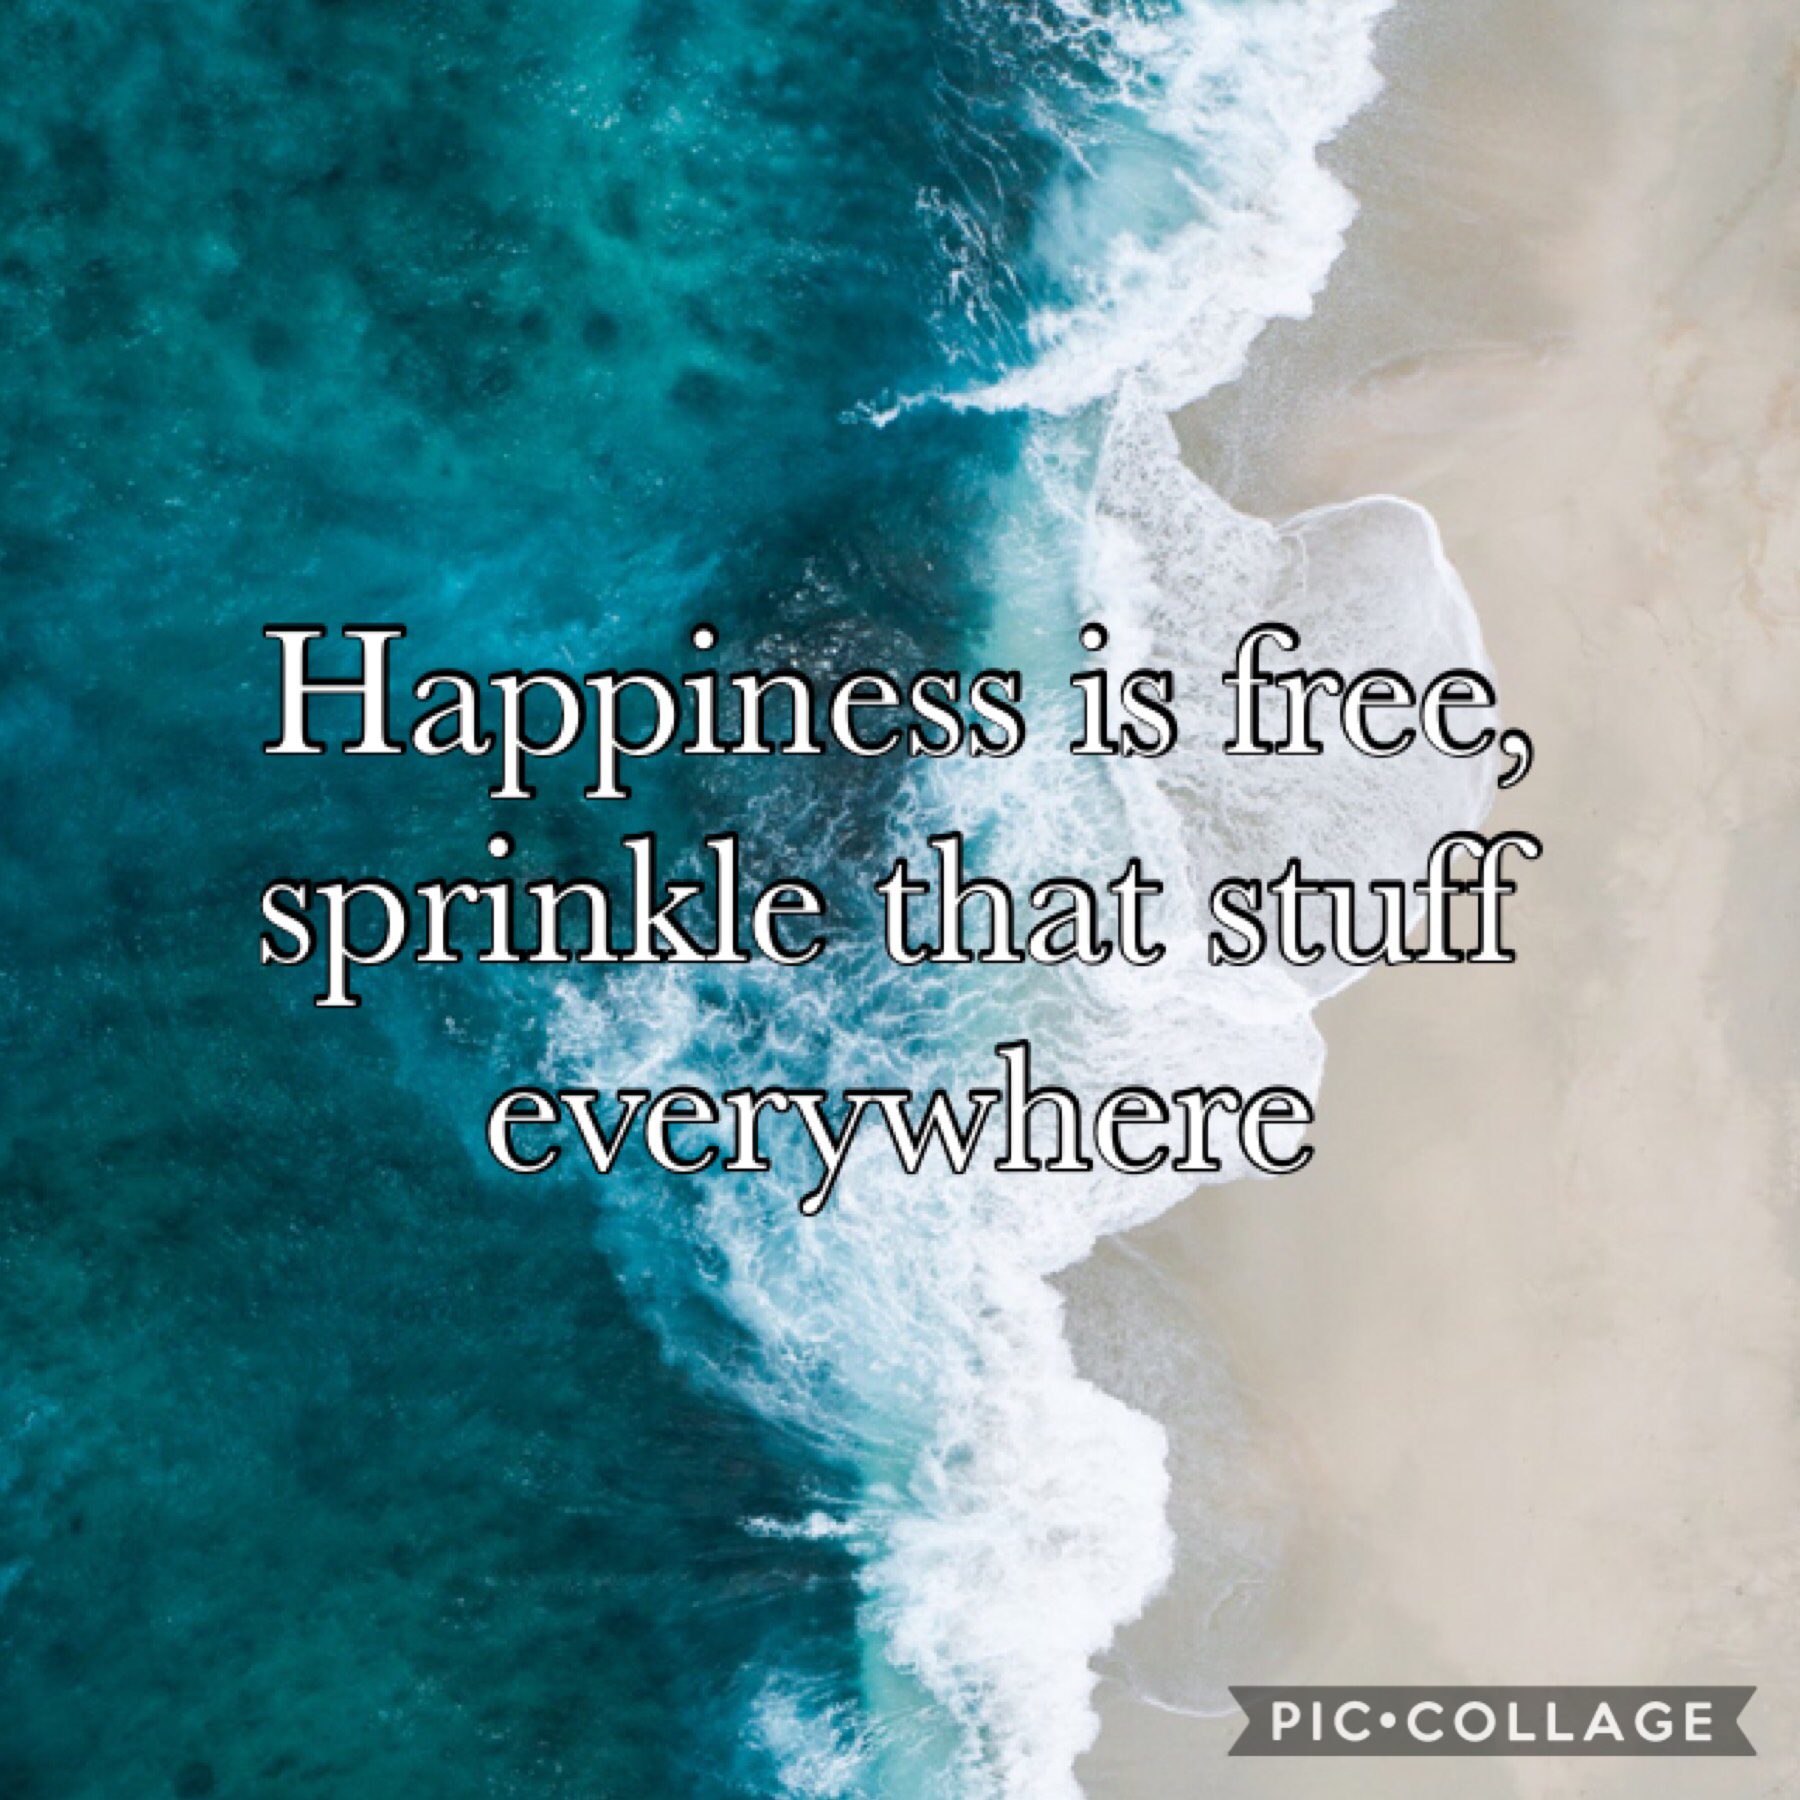 Happiness is free, sprinkle that stuff everywhere ✨